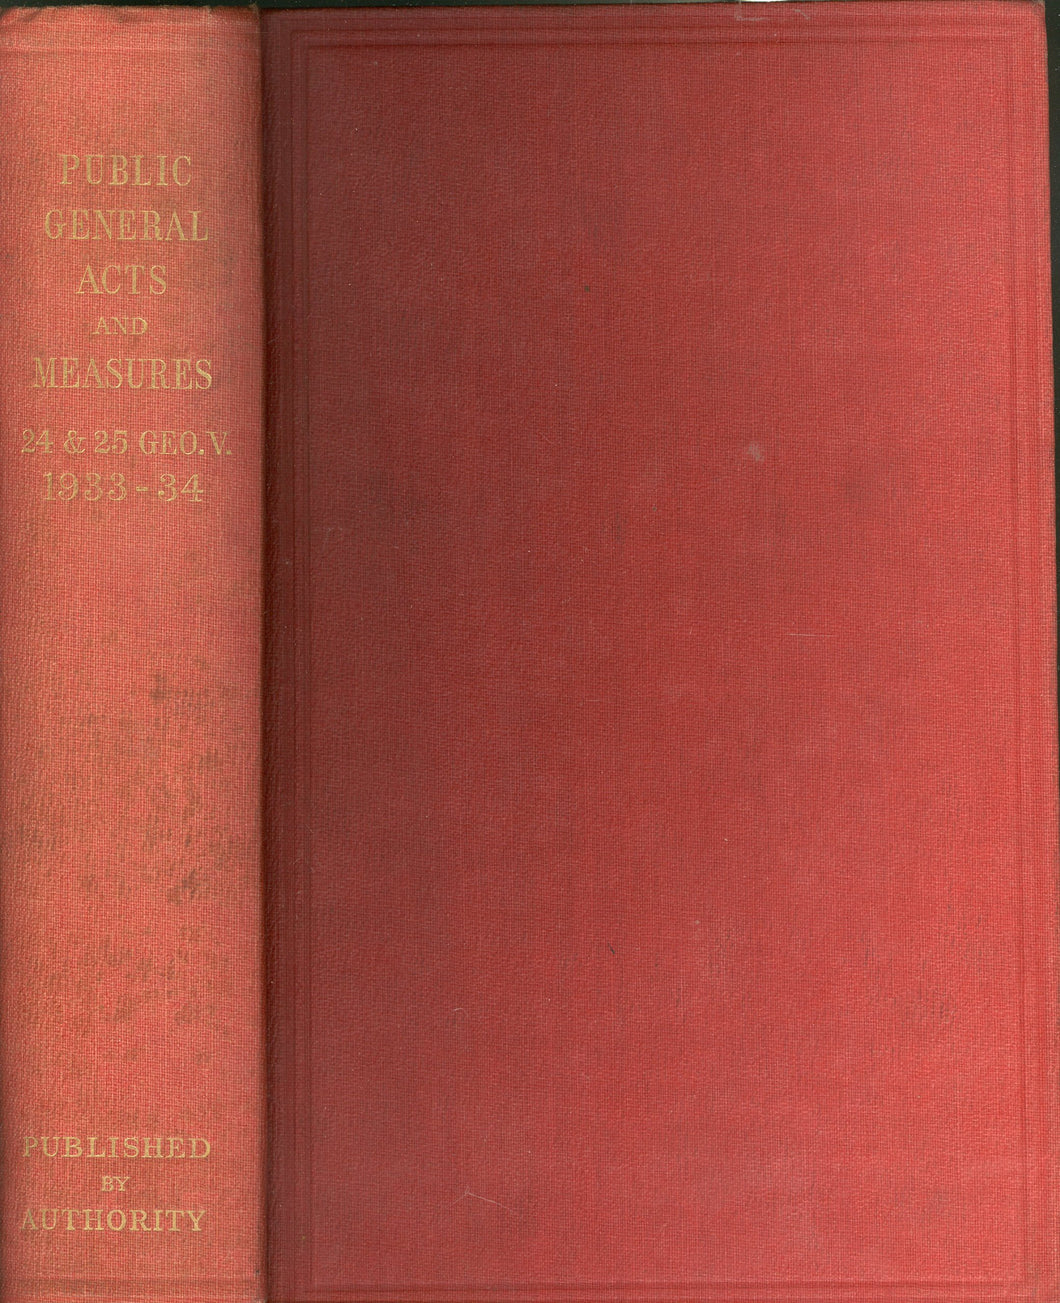 Public General Acts and Measures 24 & 25 Geo. V. 1933-34